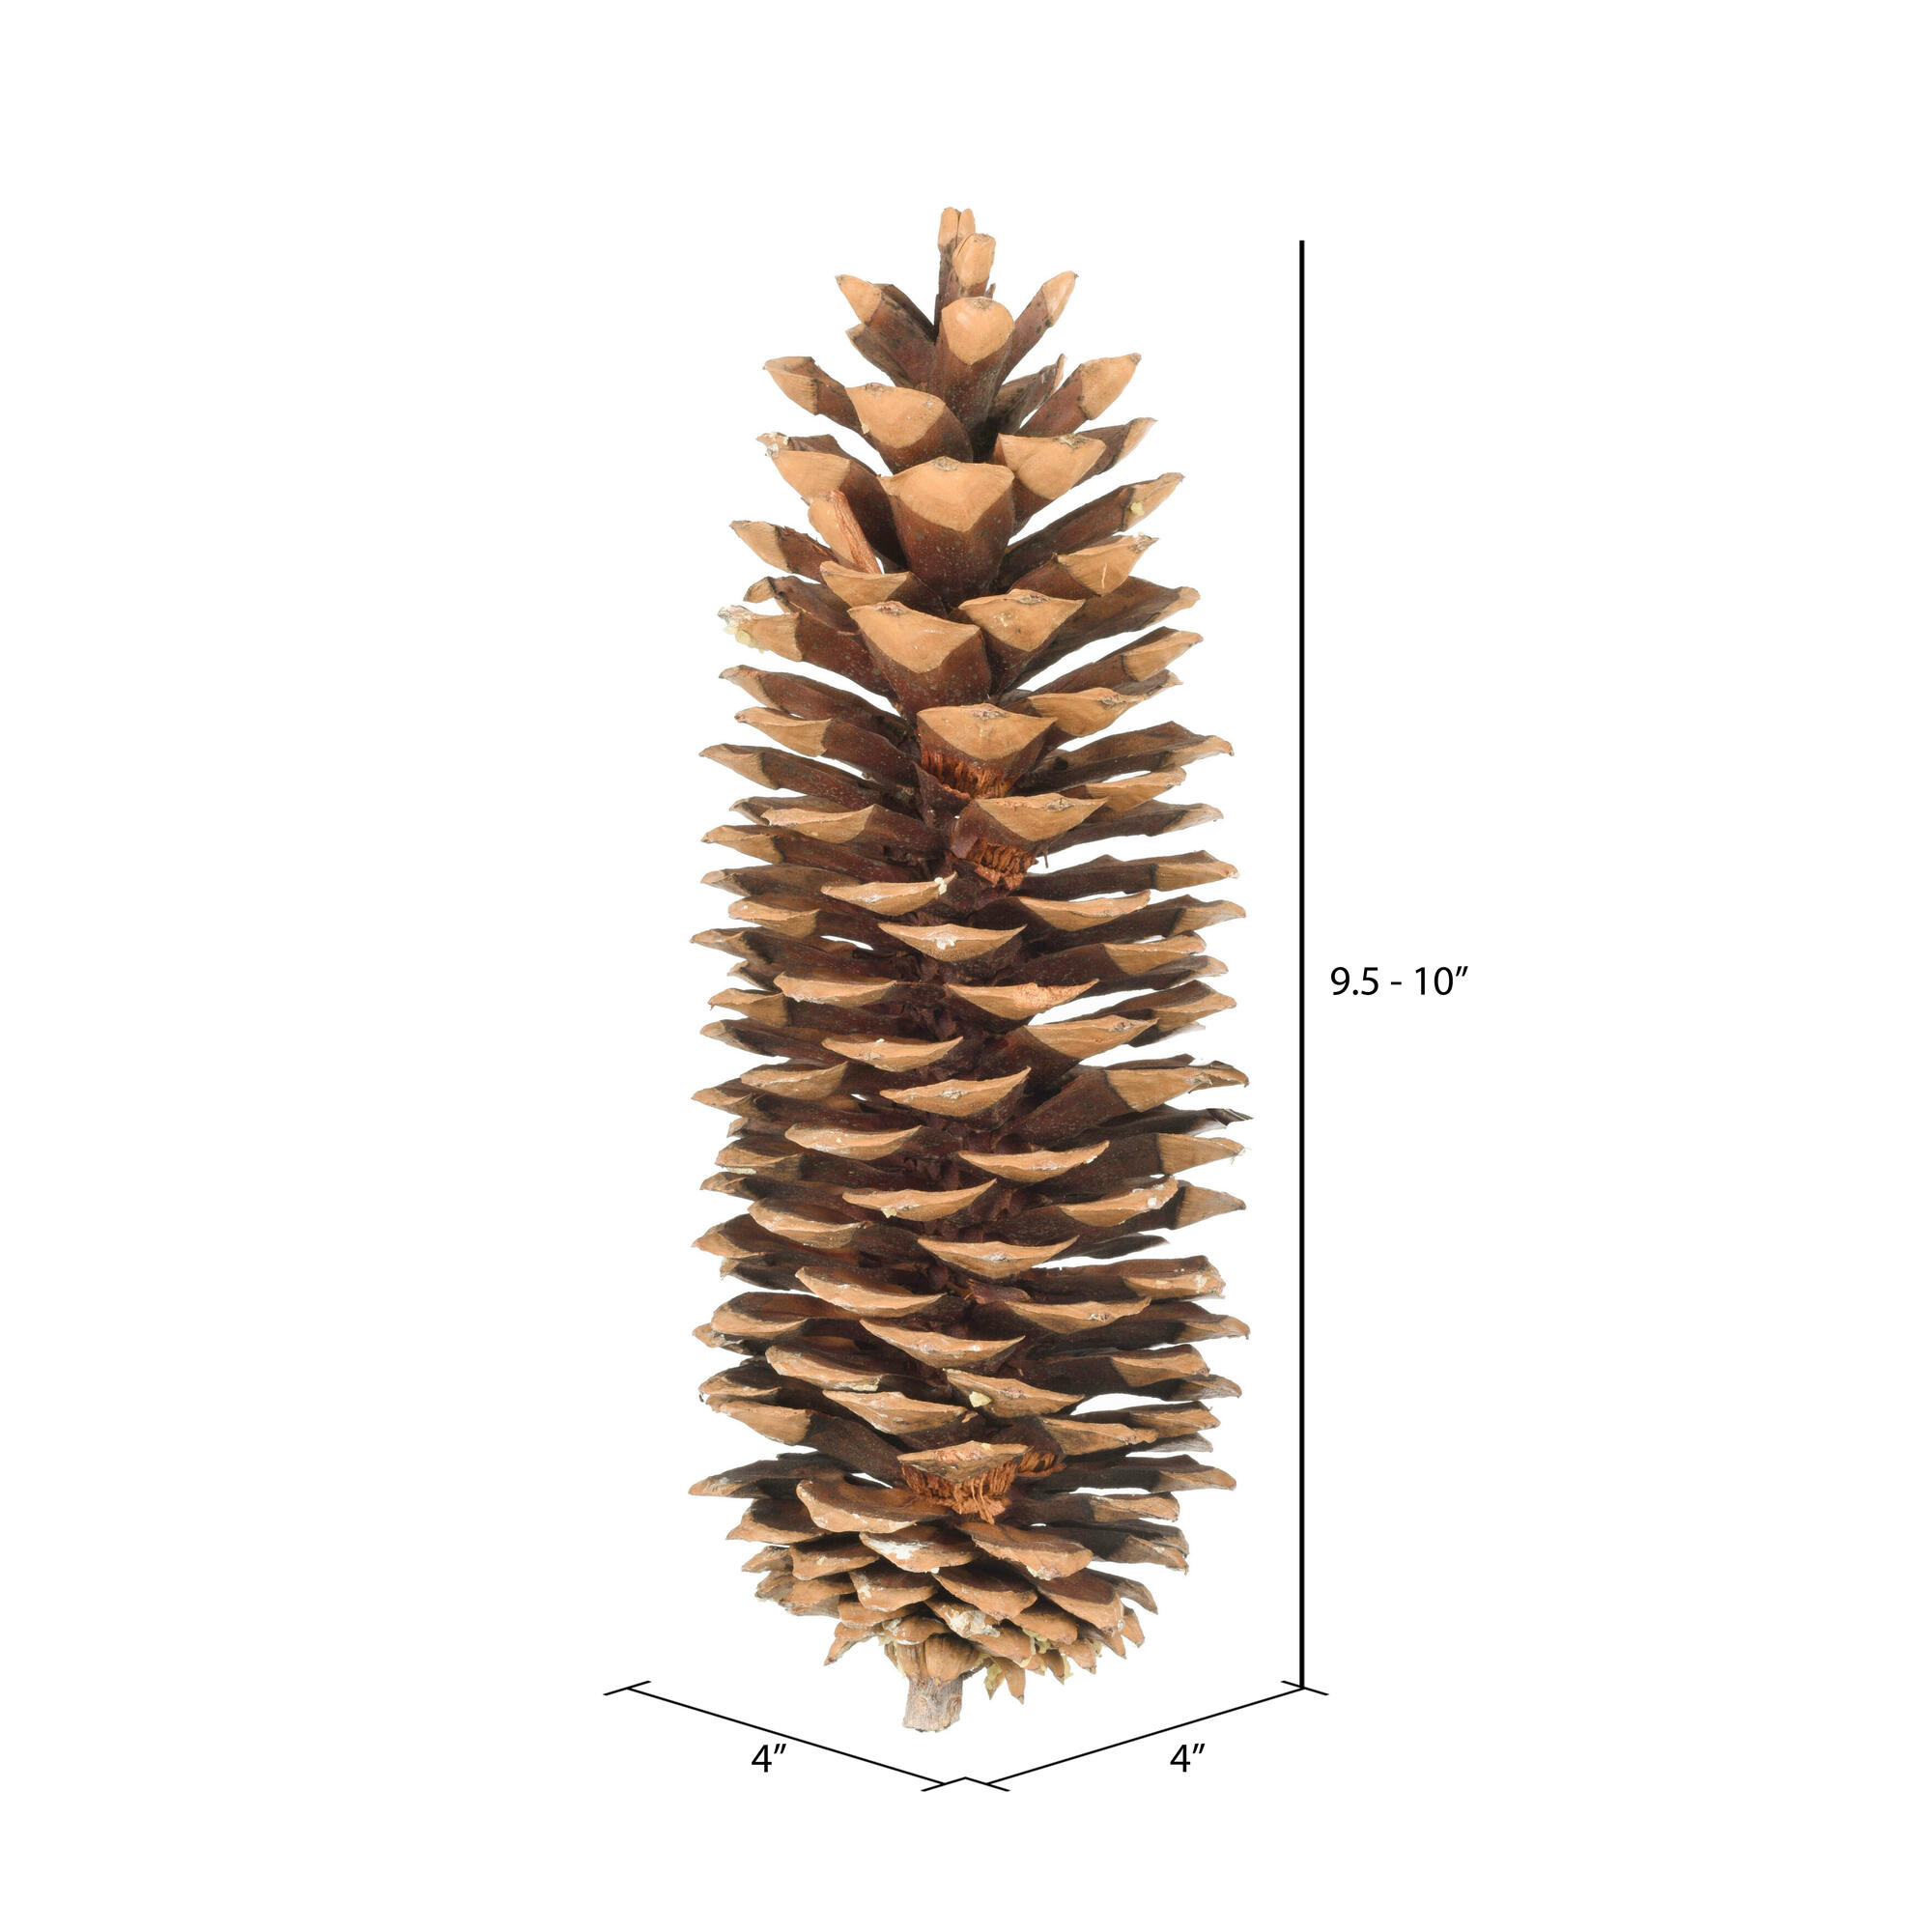 Sugar Pine Cones - Very Large Pine Cones - 1 Individual Pine Cone - Extra Long by Dried Decor